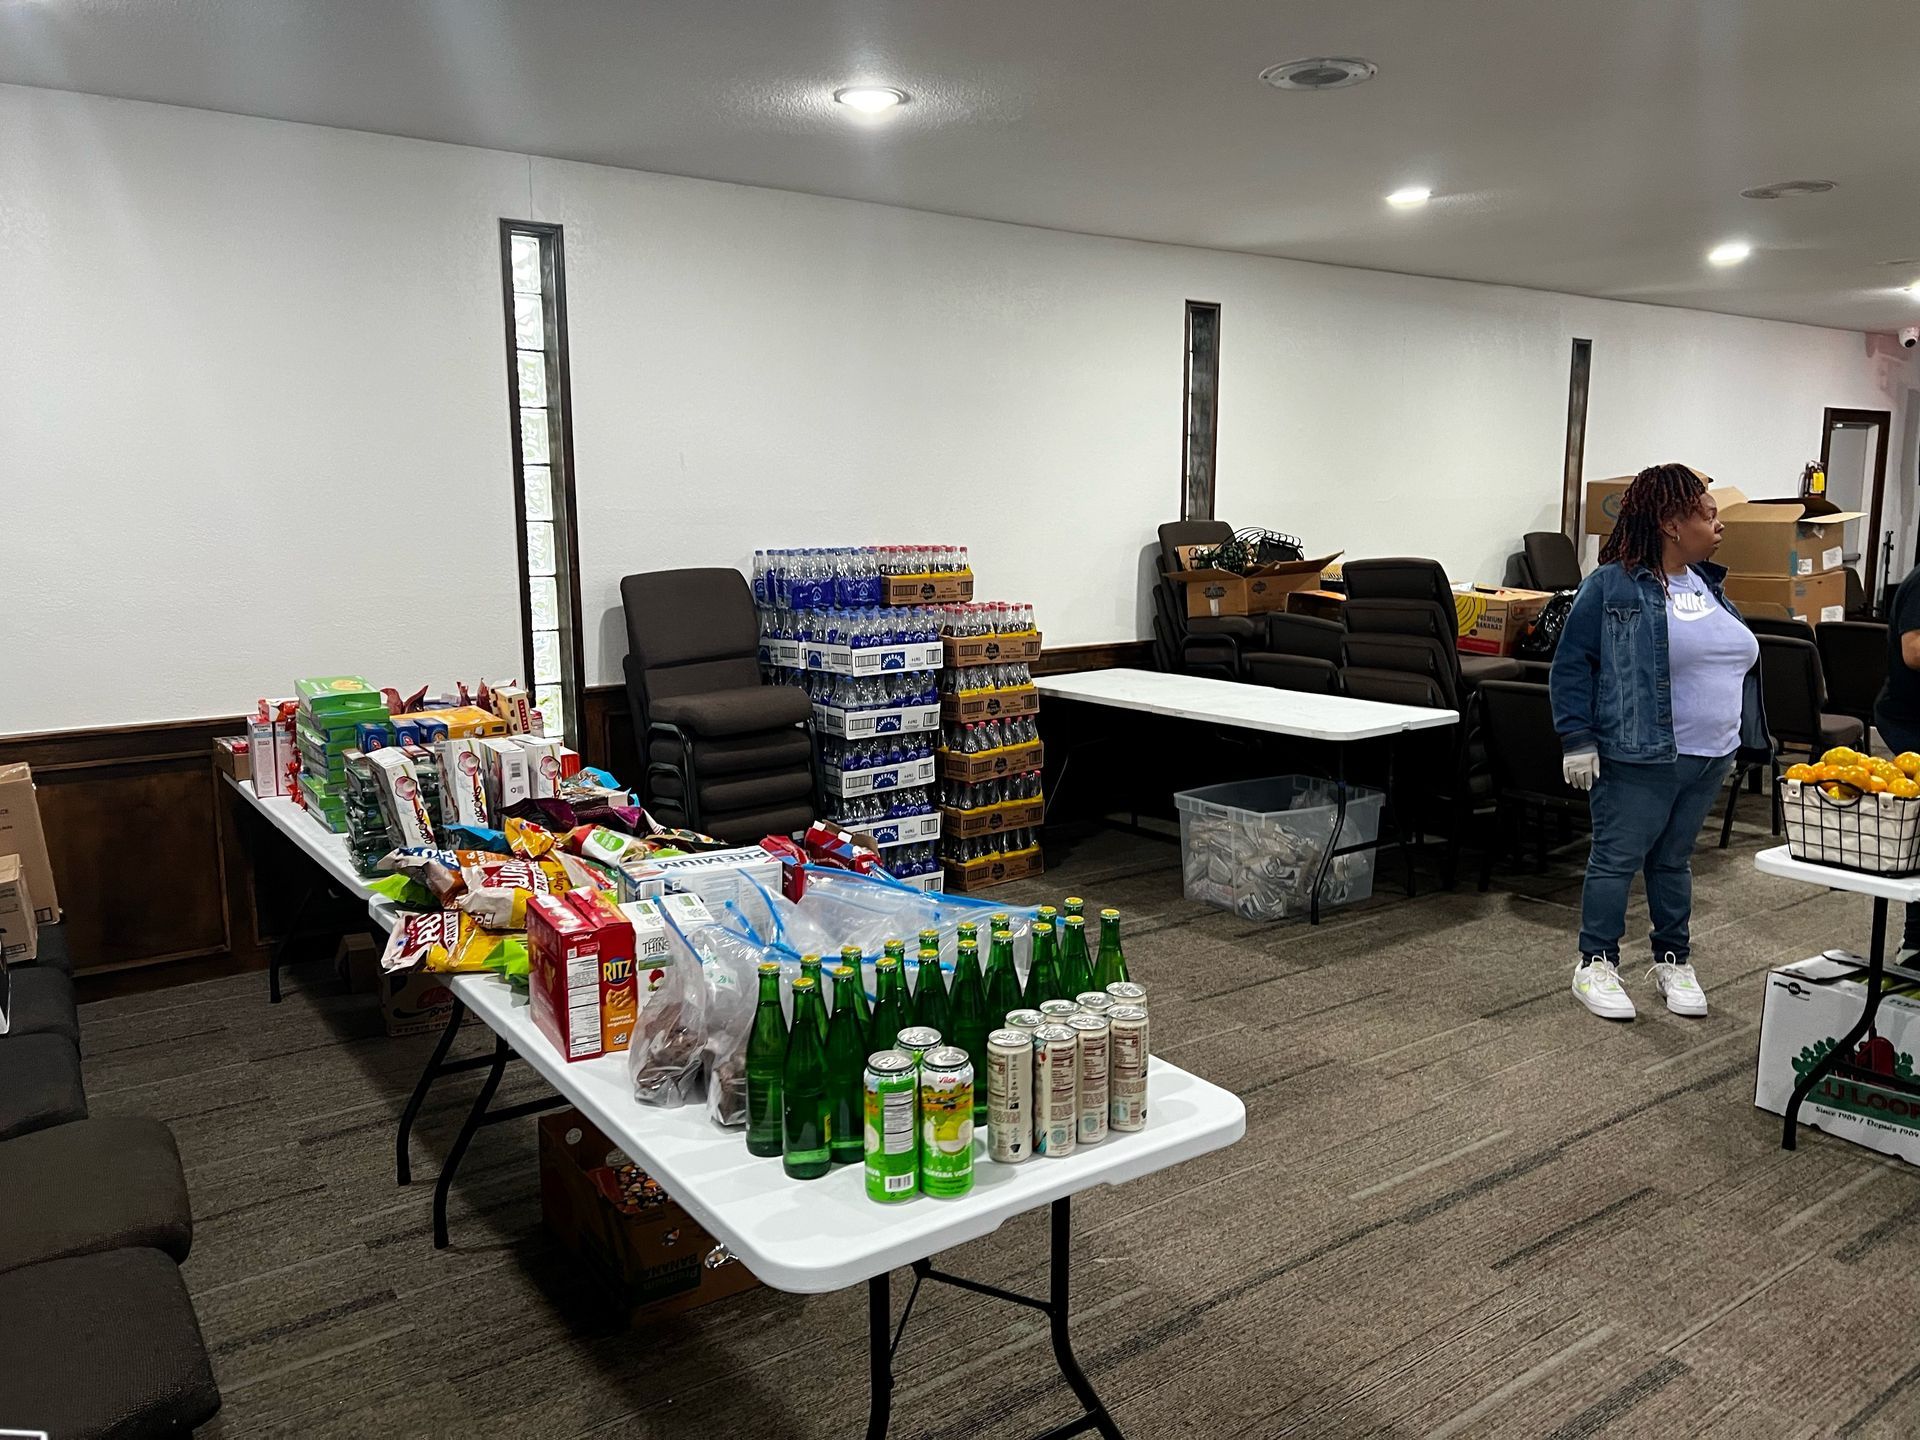 A woman is standing in a room filled with tables and bottles of food. - Lancaster, TX - International Harvest Fellowship Ministries